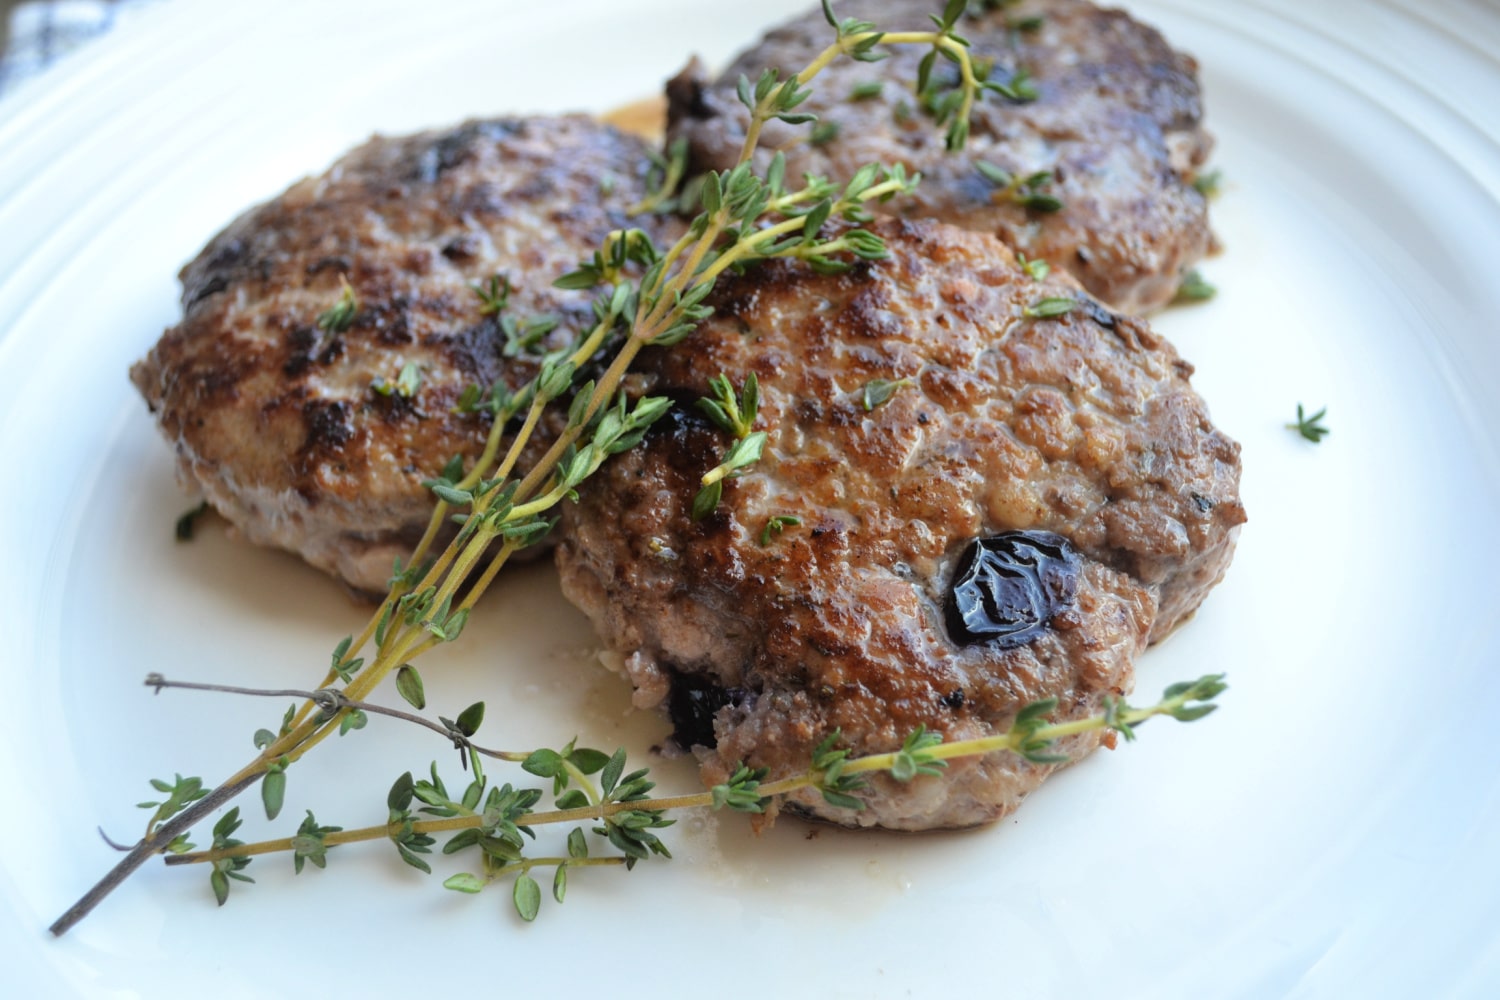 Blueberry pork patties with thyme